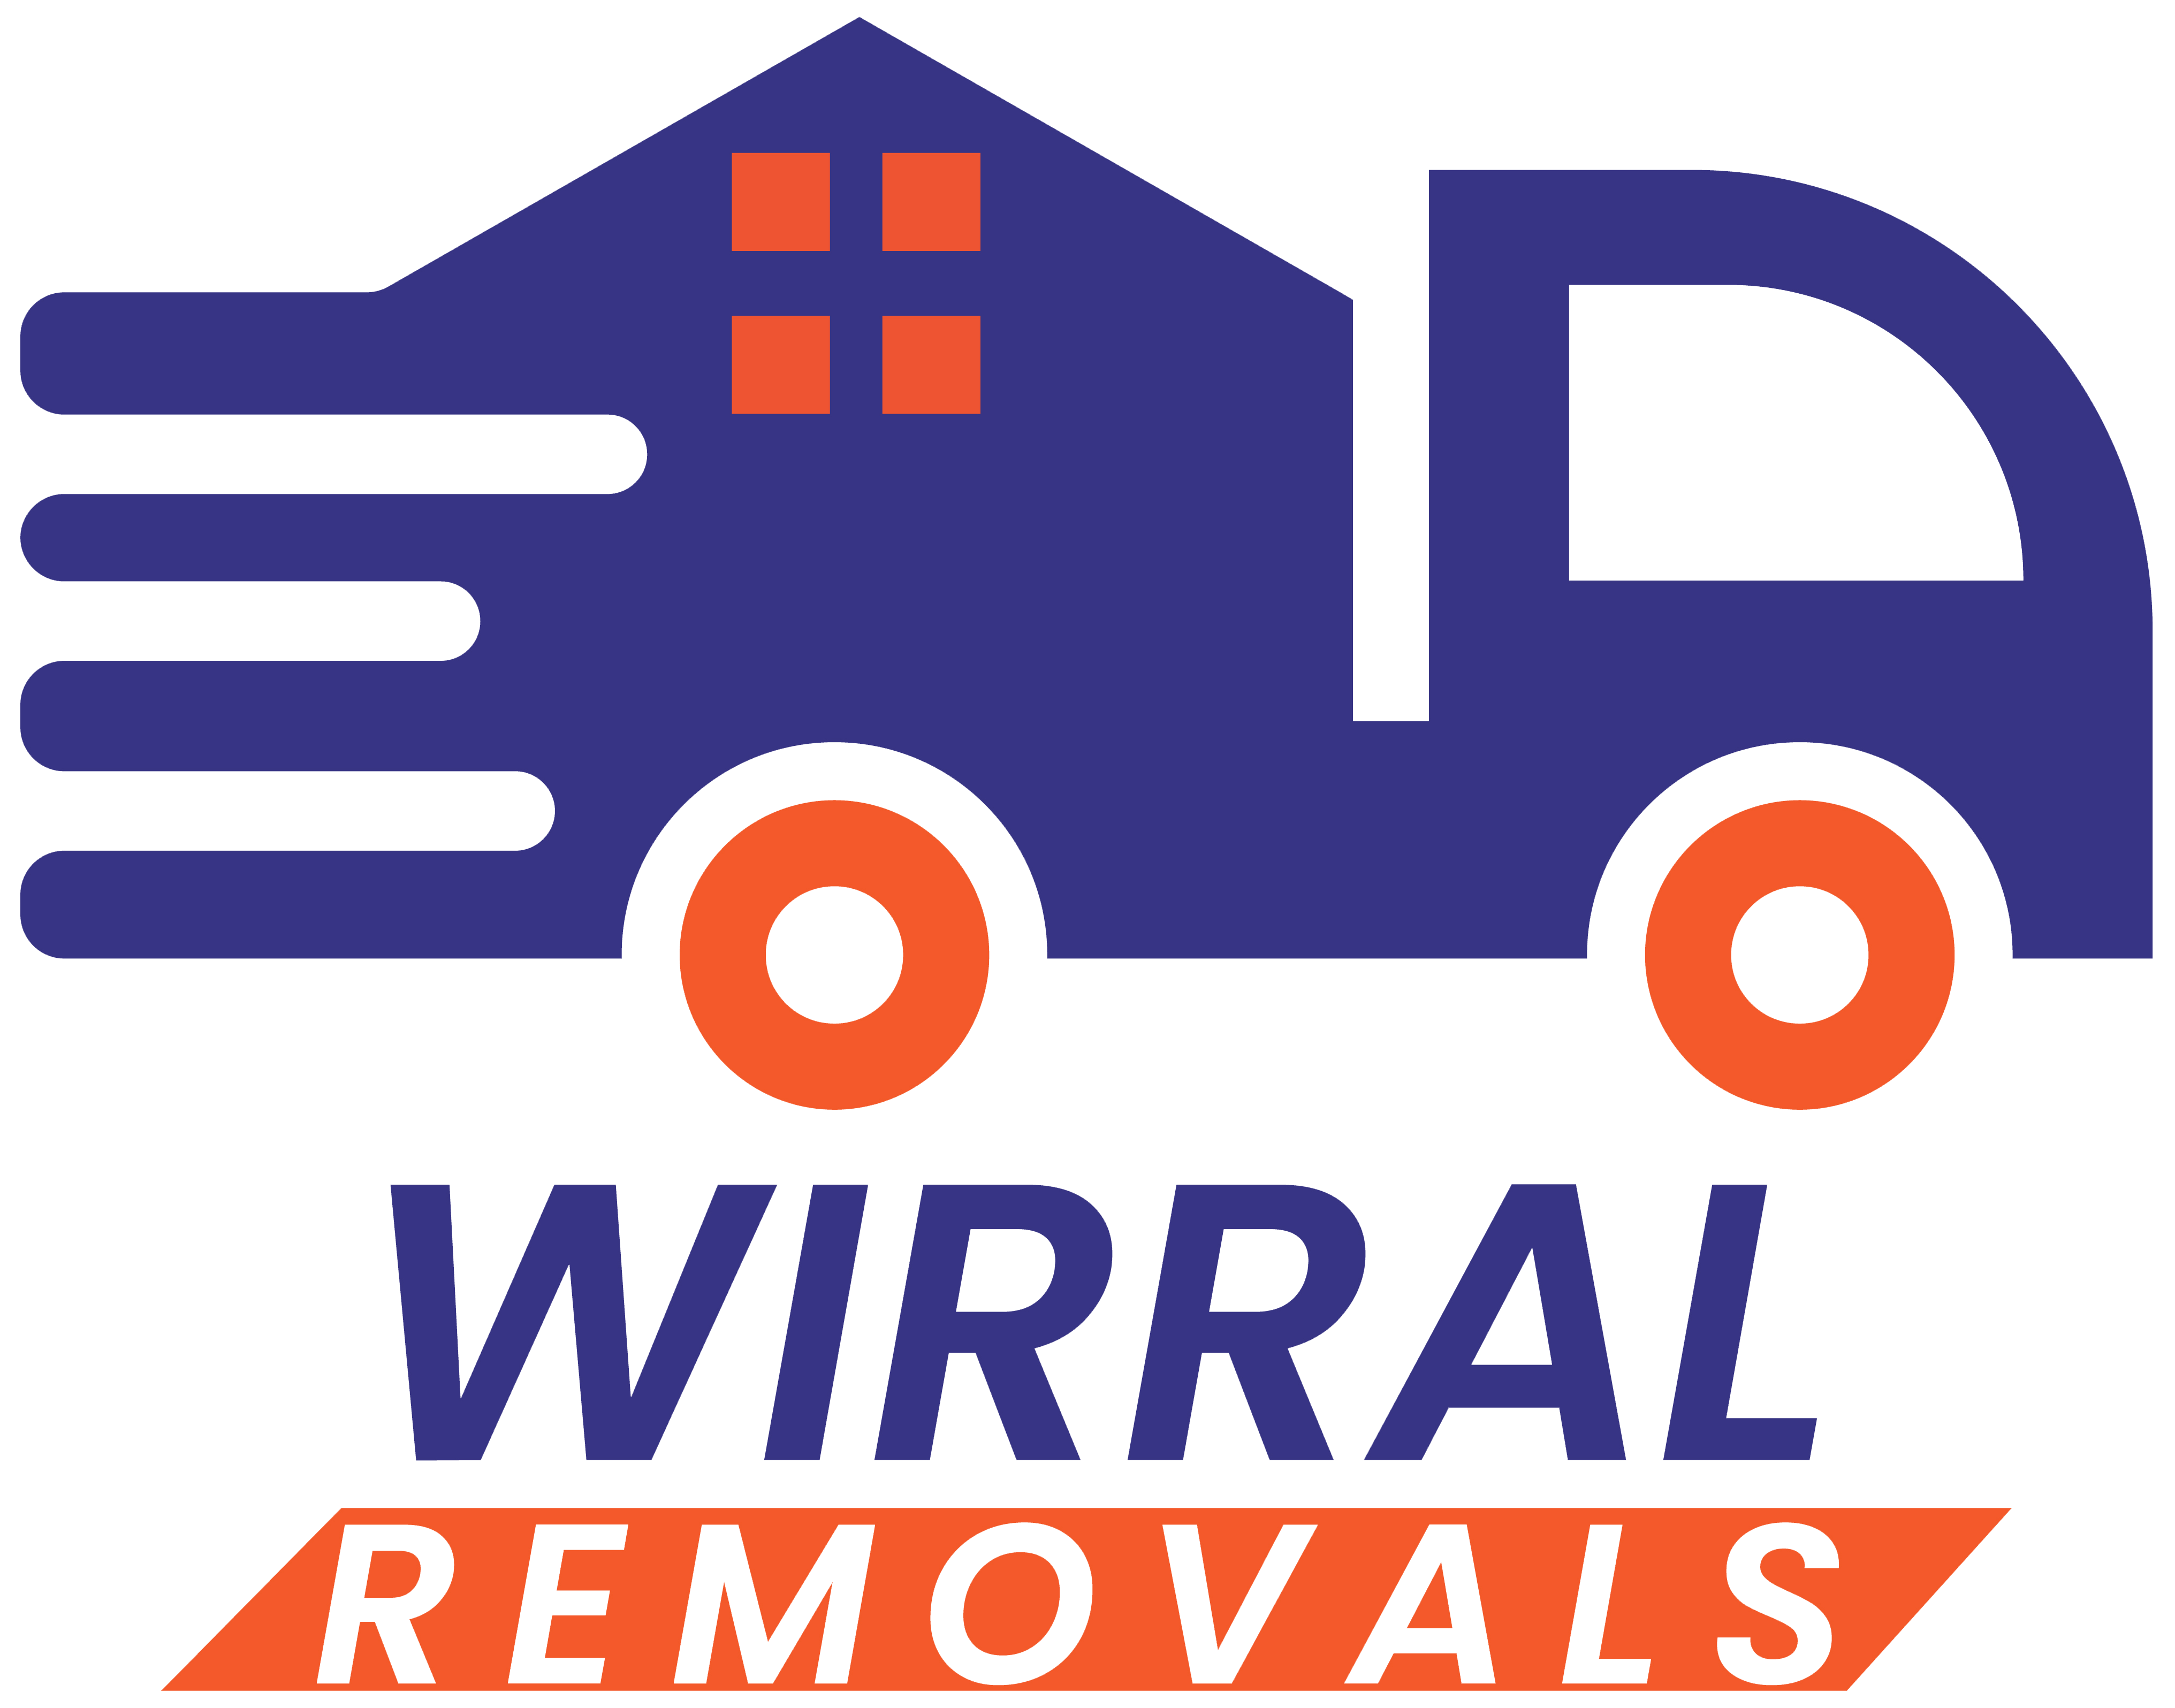 Removals Wirral